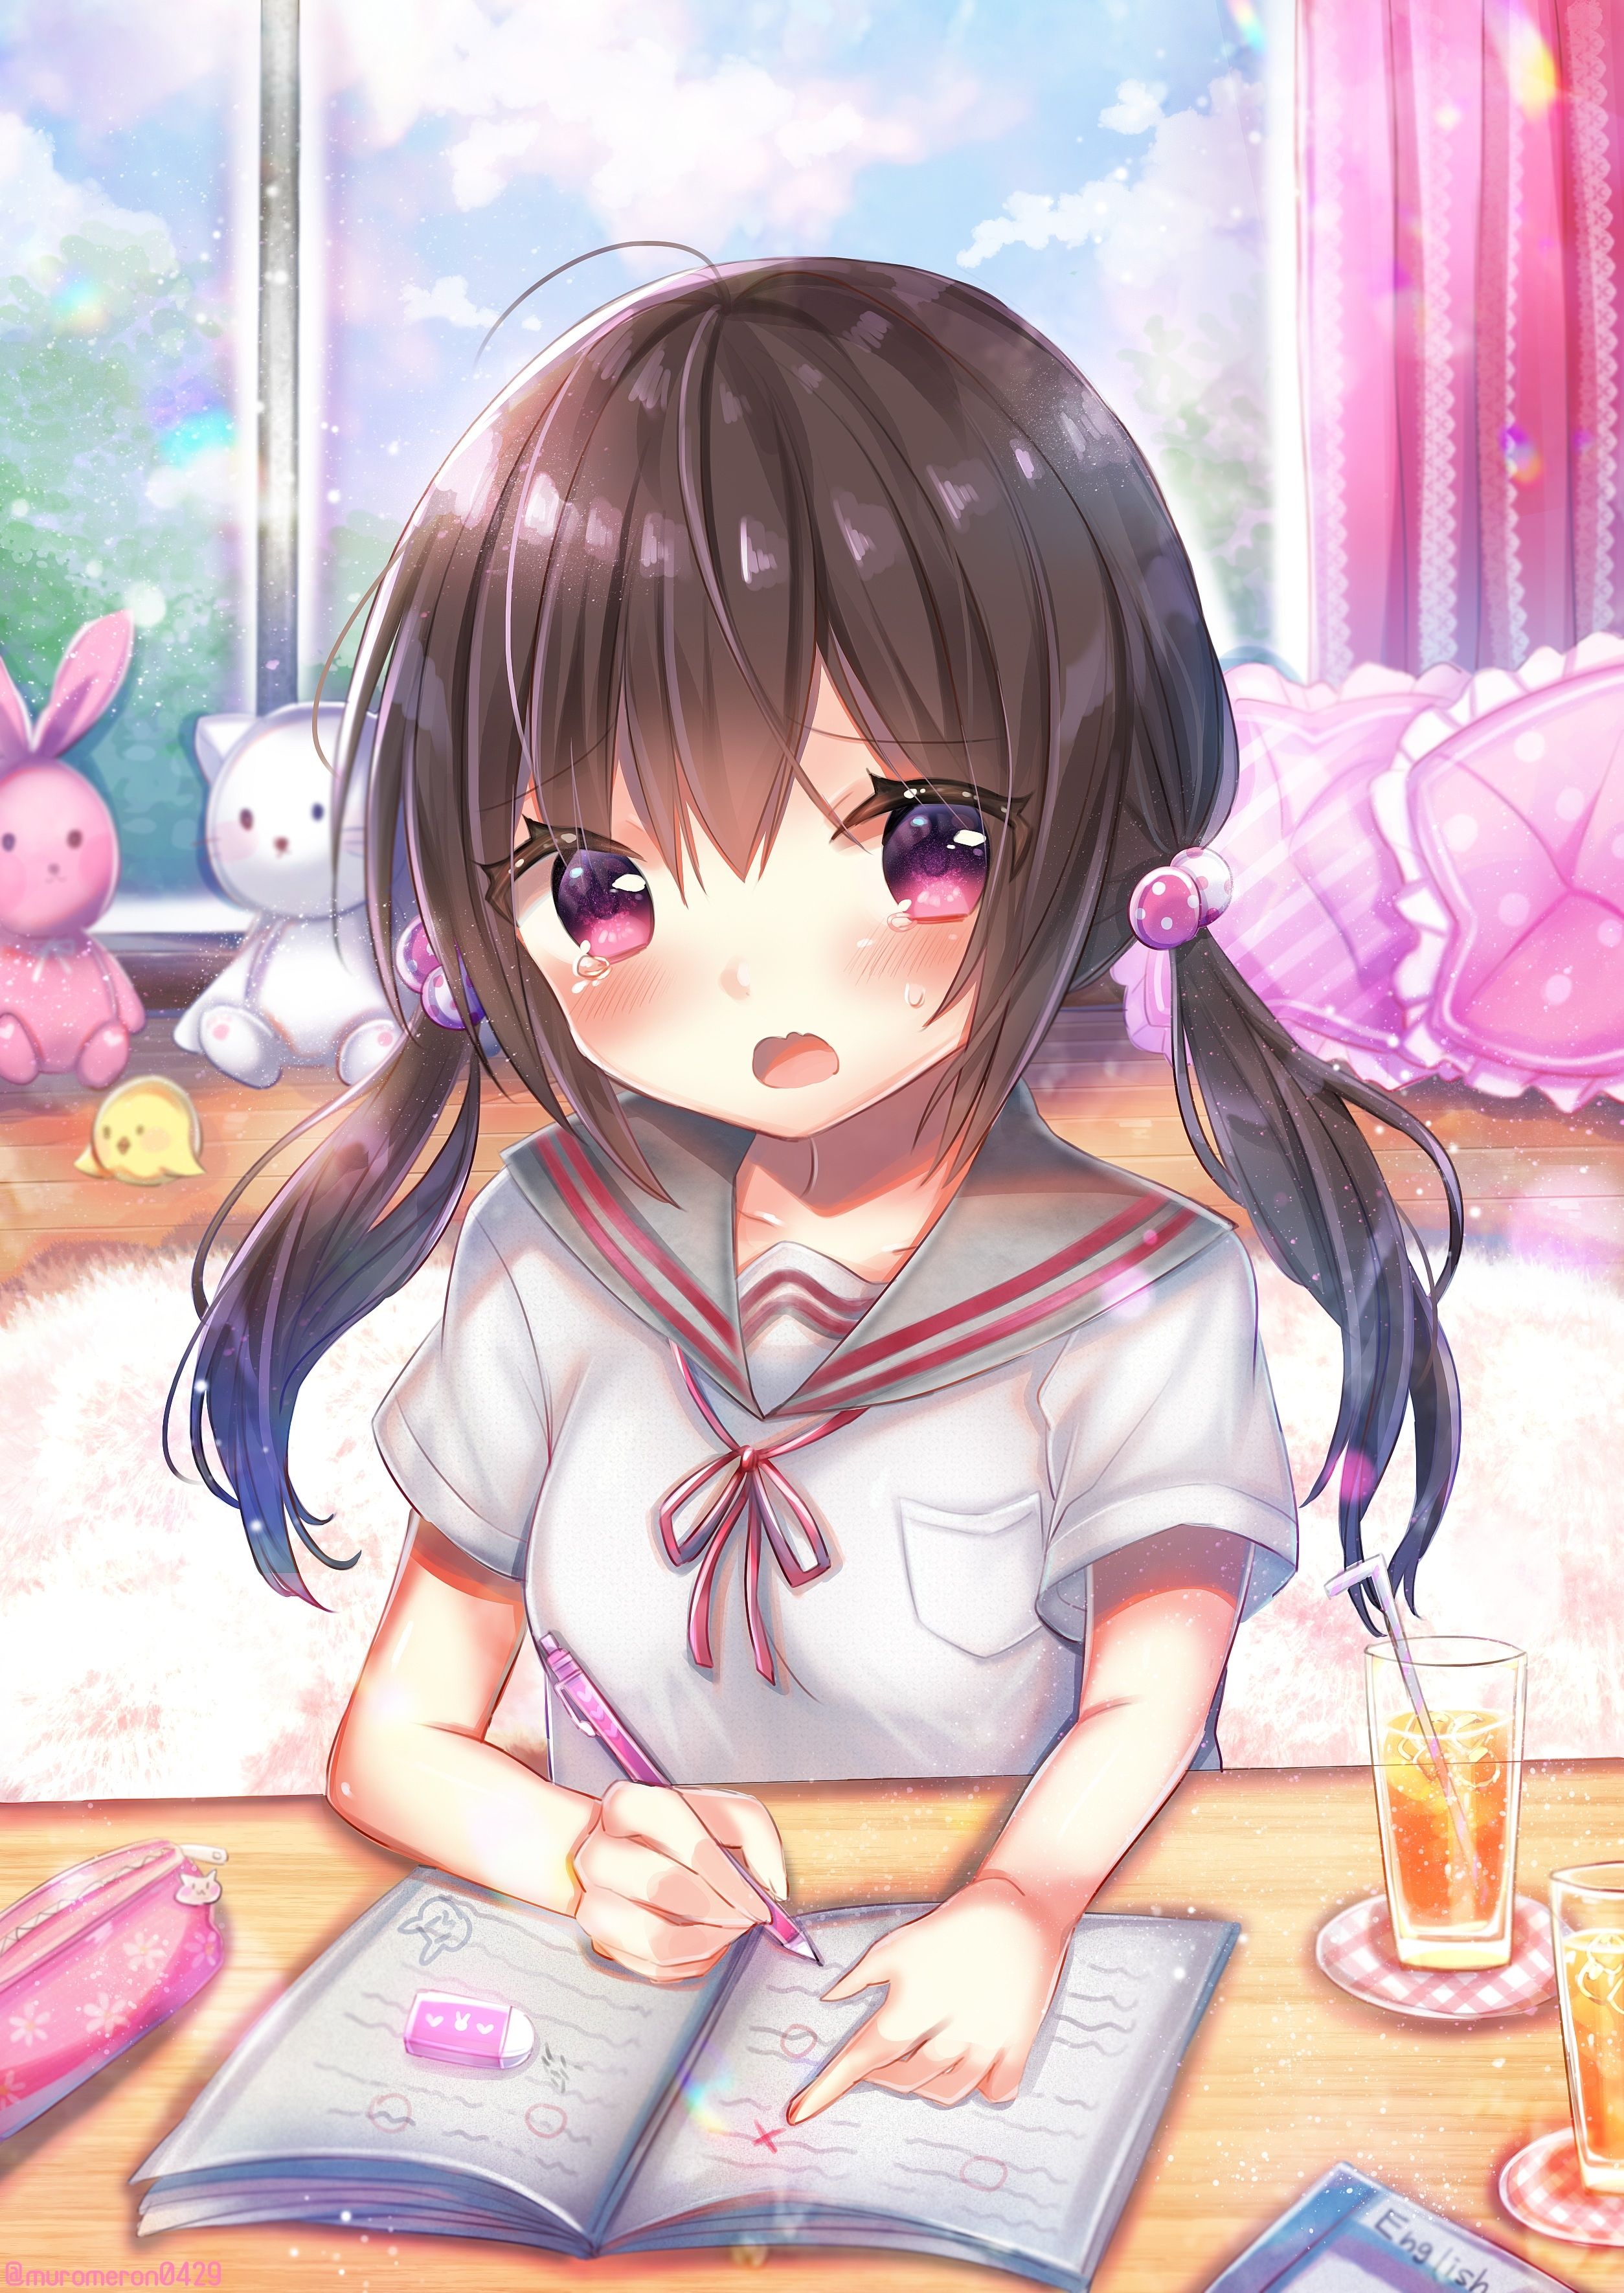 Download 2508x3541 Loli, Anime Girl, Brown Hair, Twintails, Studying, Cute, Teary Eyes Wallpaper